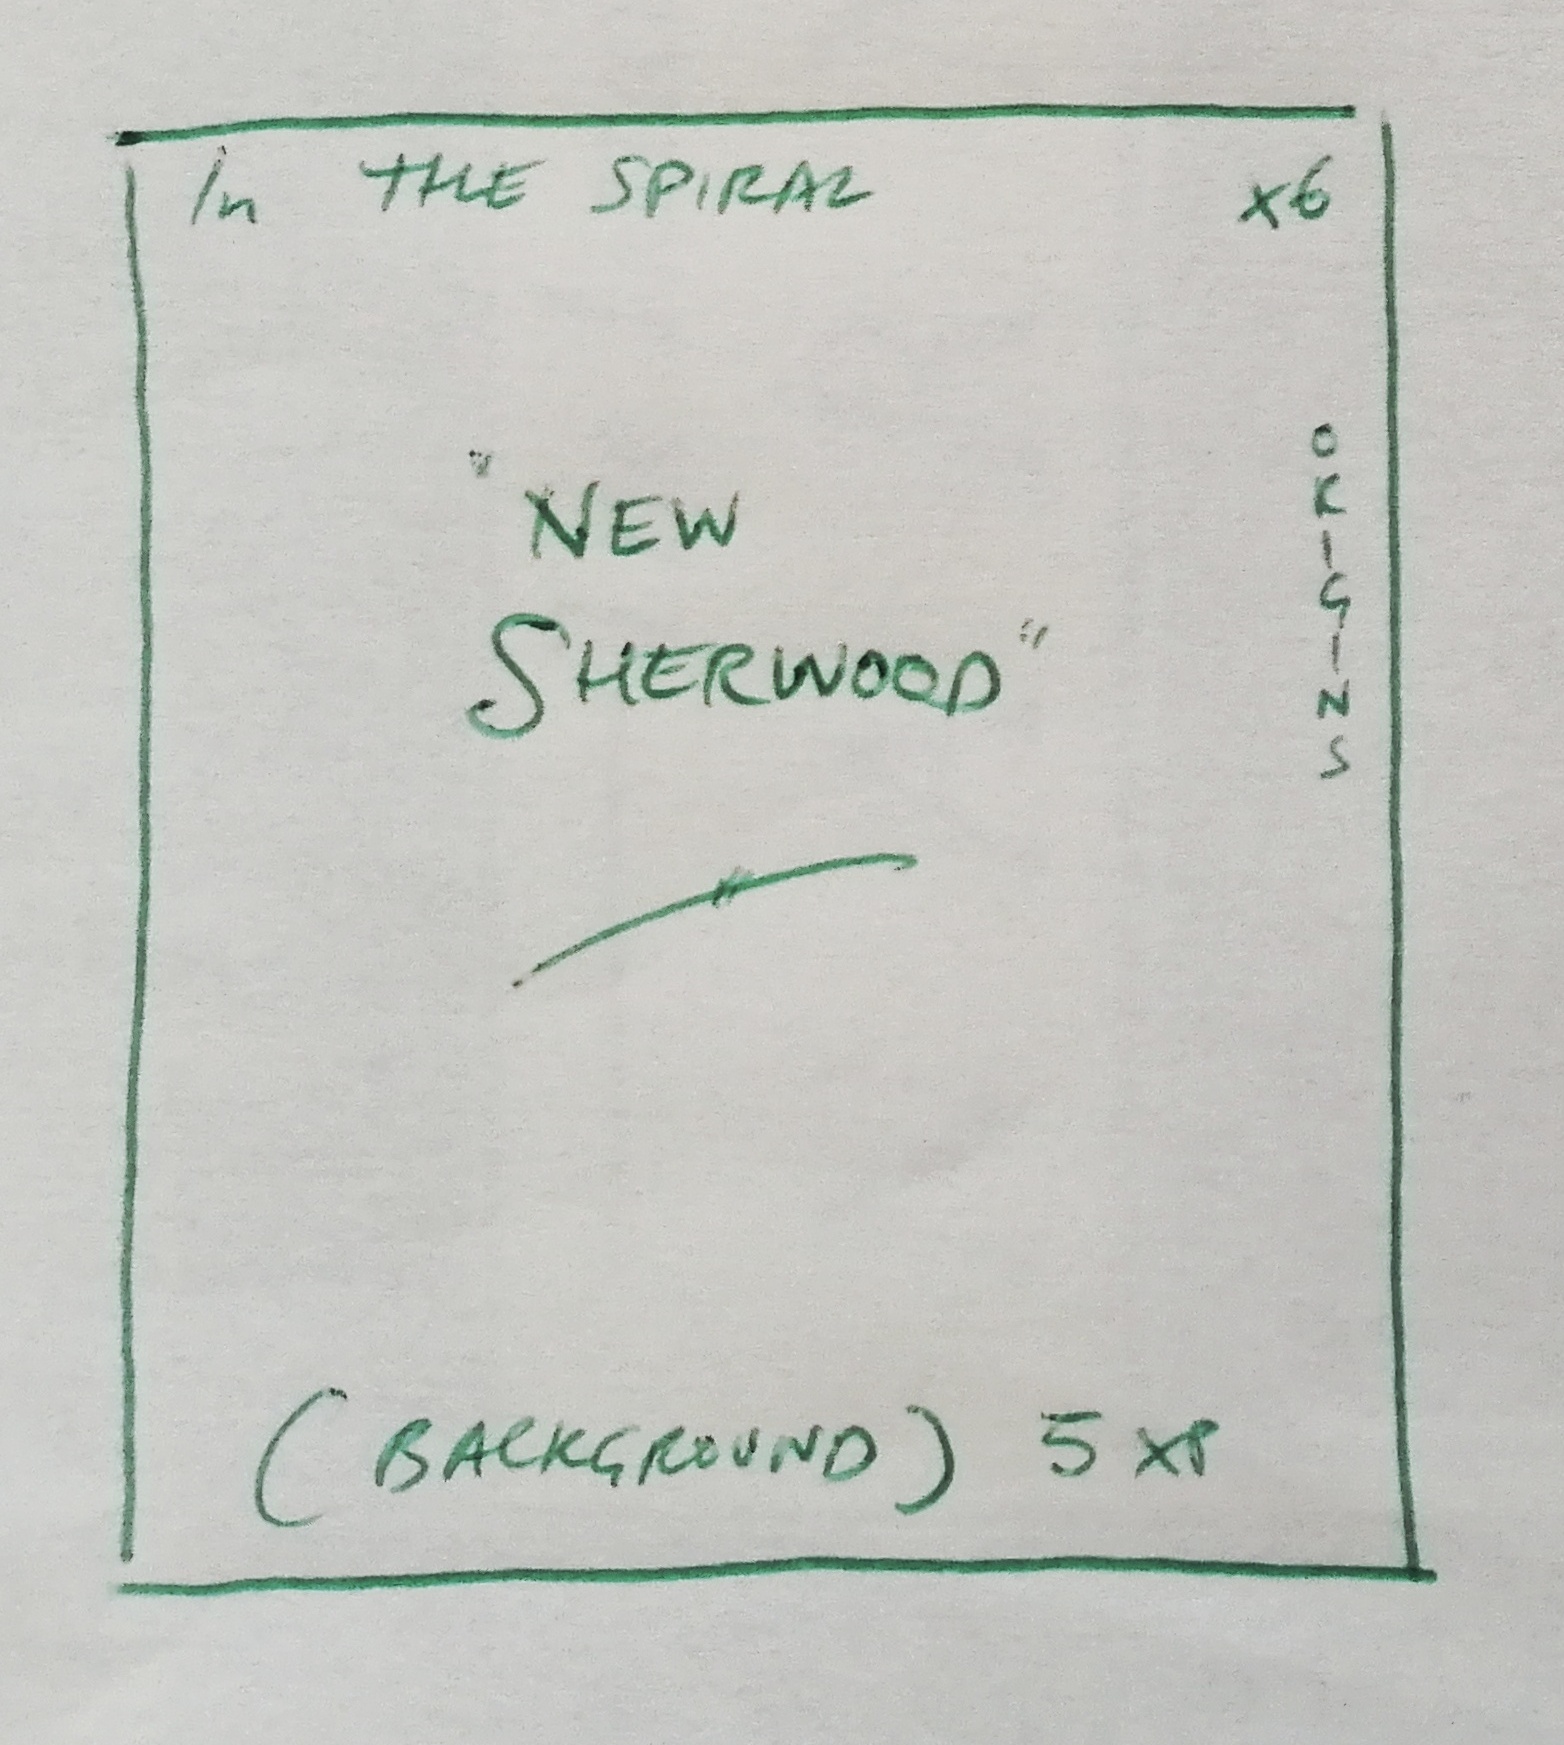 In The Spiral: 'New Sherwood'